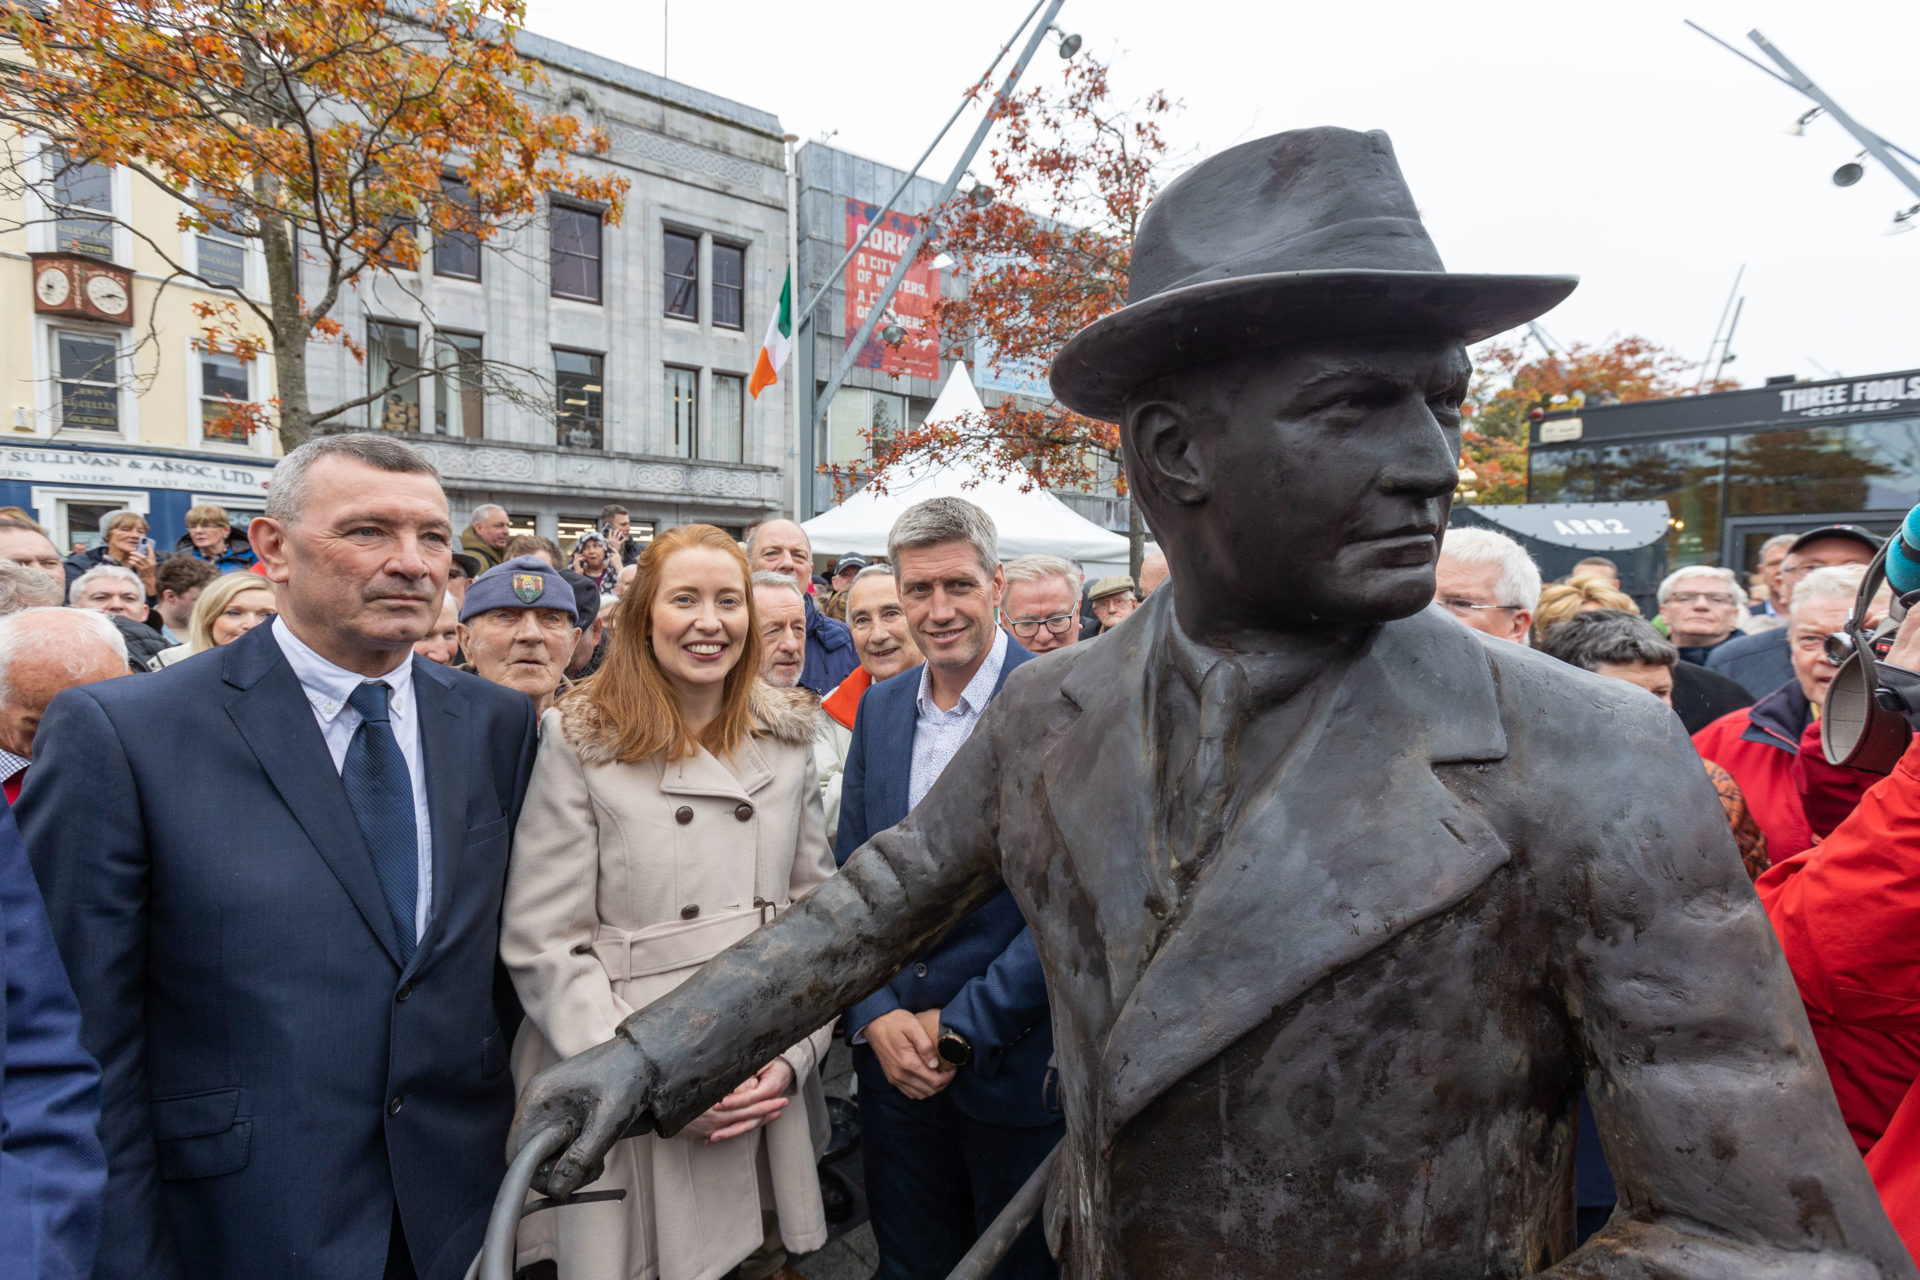 Hundreds of people turned out on the Grand Parade Cork City today for the reveal of a highly anticipated new statue of Michael Collins